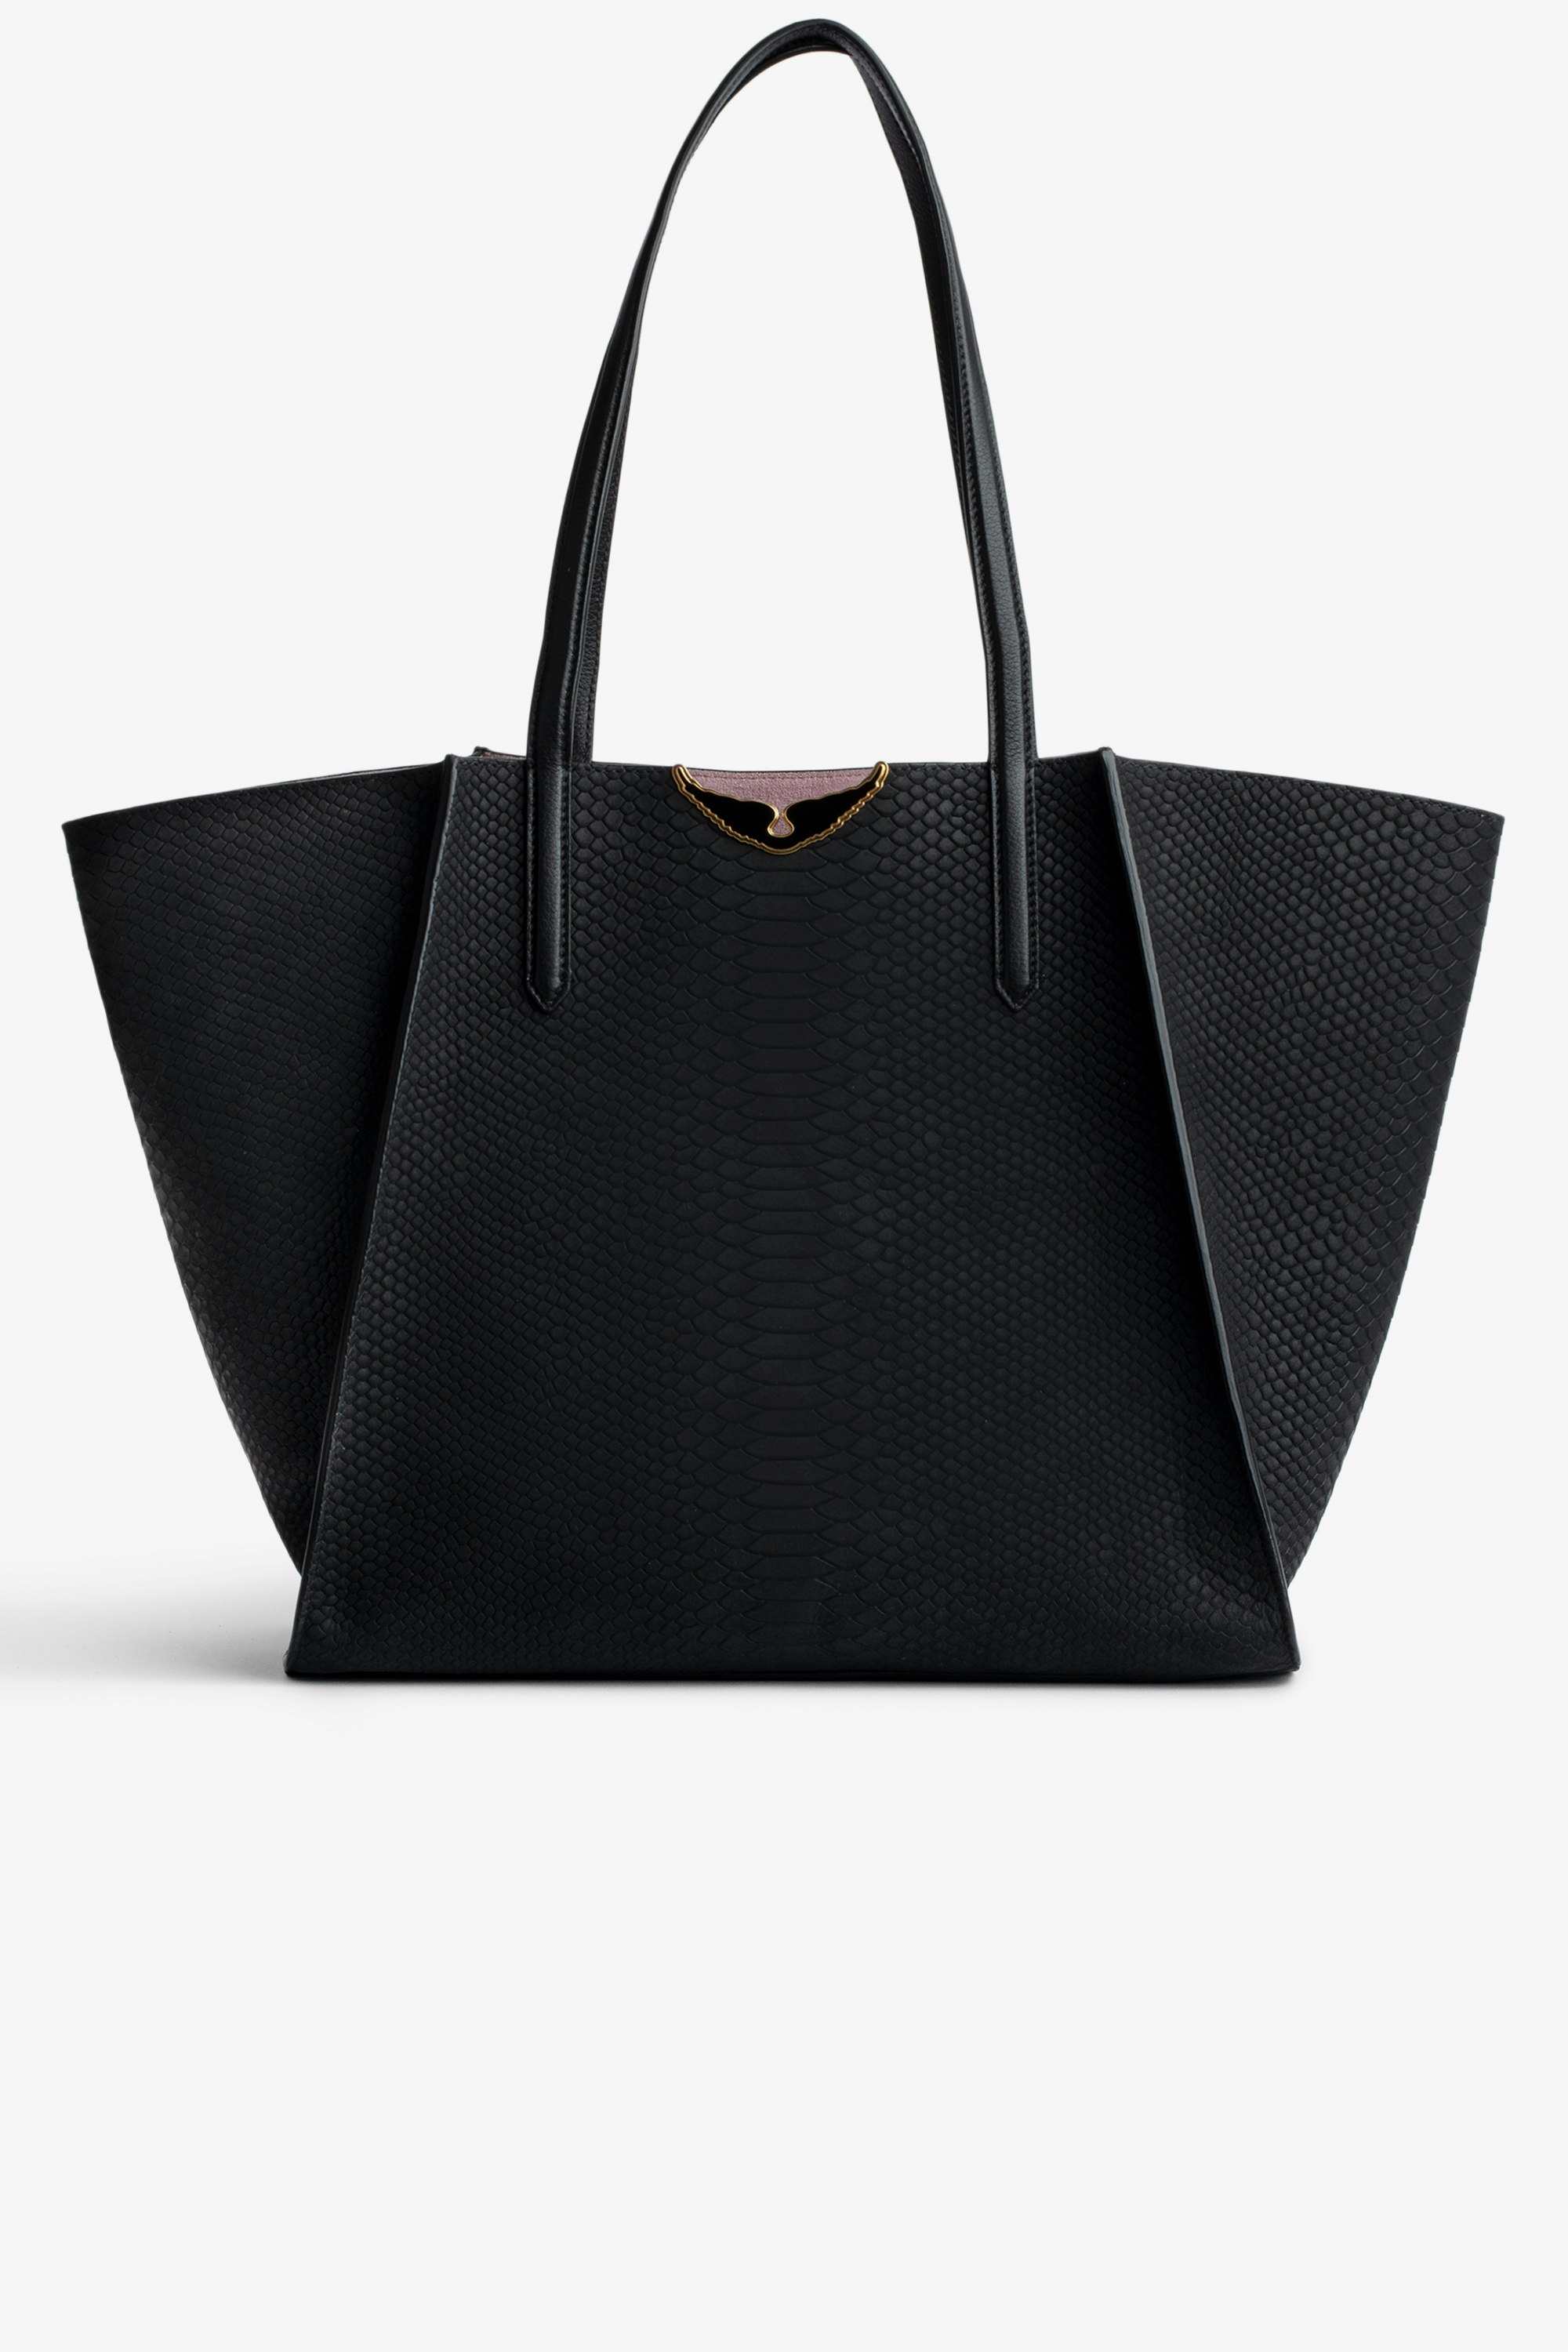 Le Borderline Soft Savage Bag - Women's tote bag in black python-effect cow leather leather and pink suede with black lacquered wings